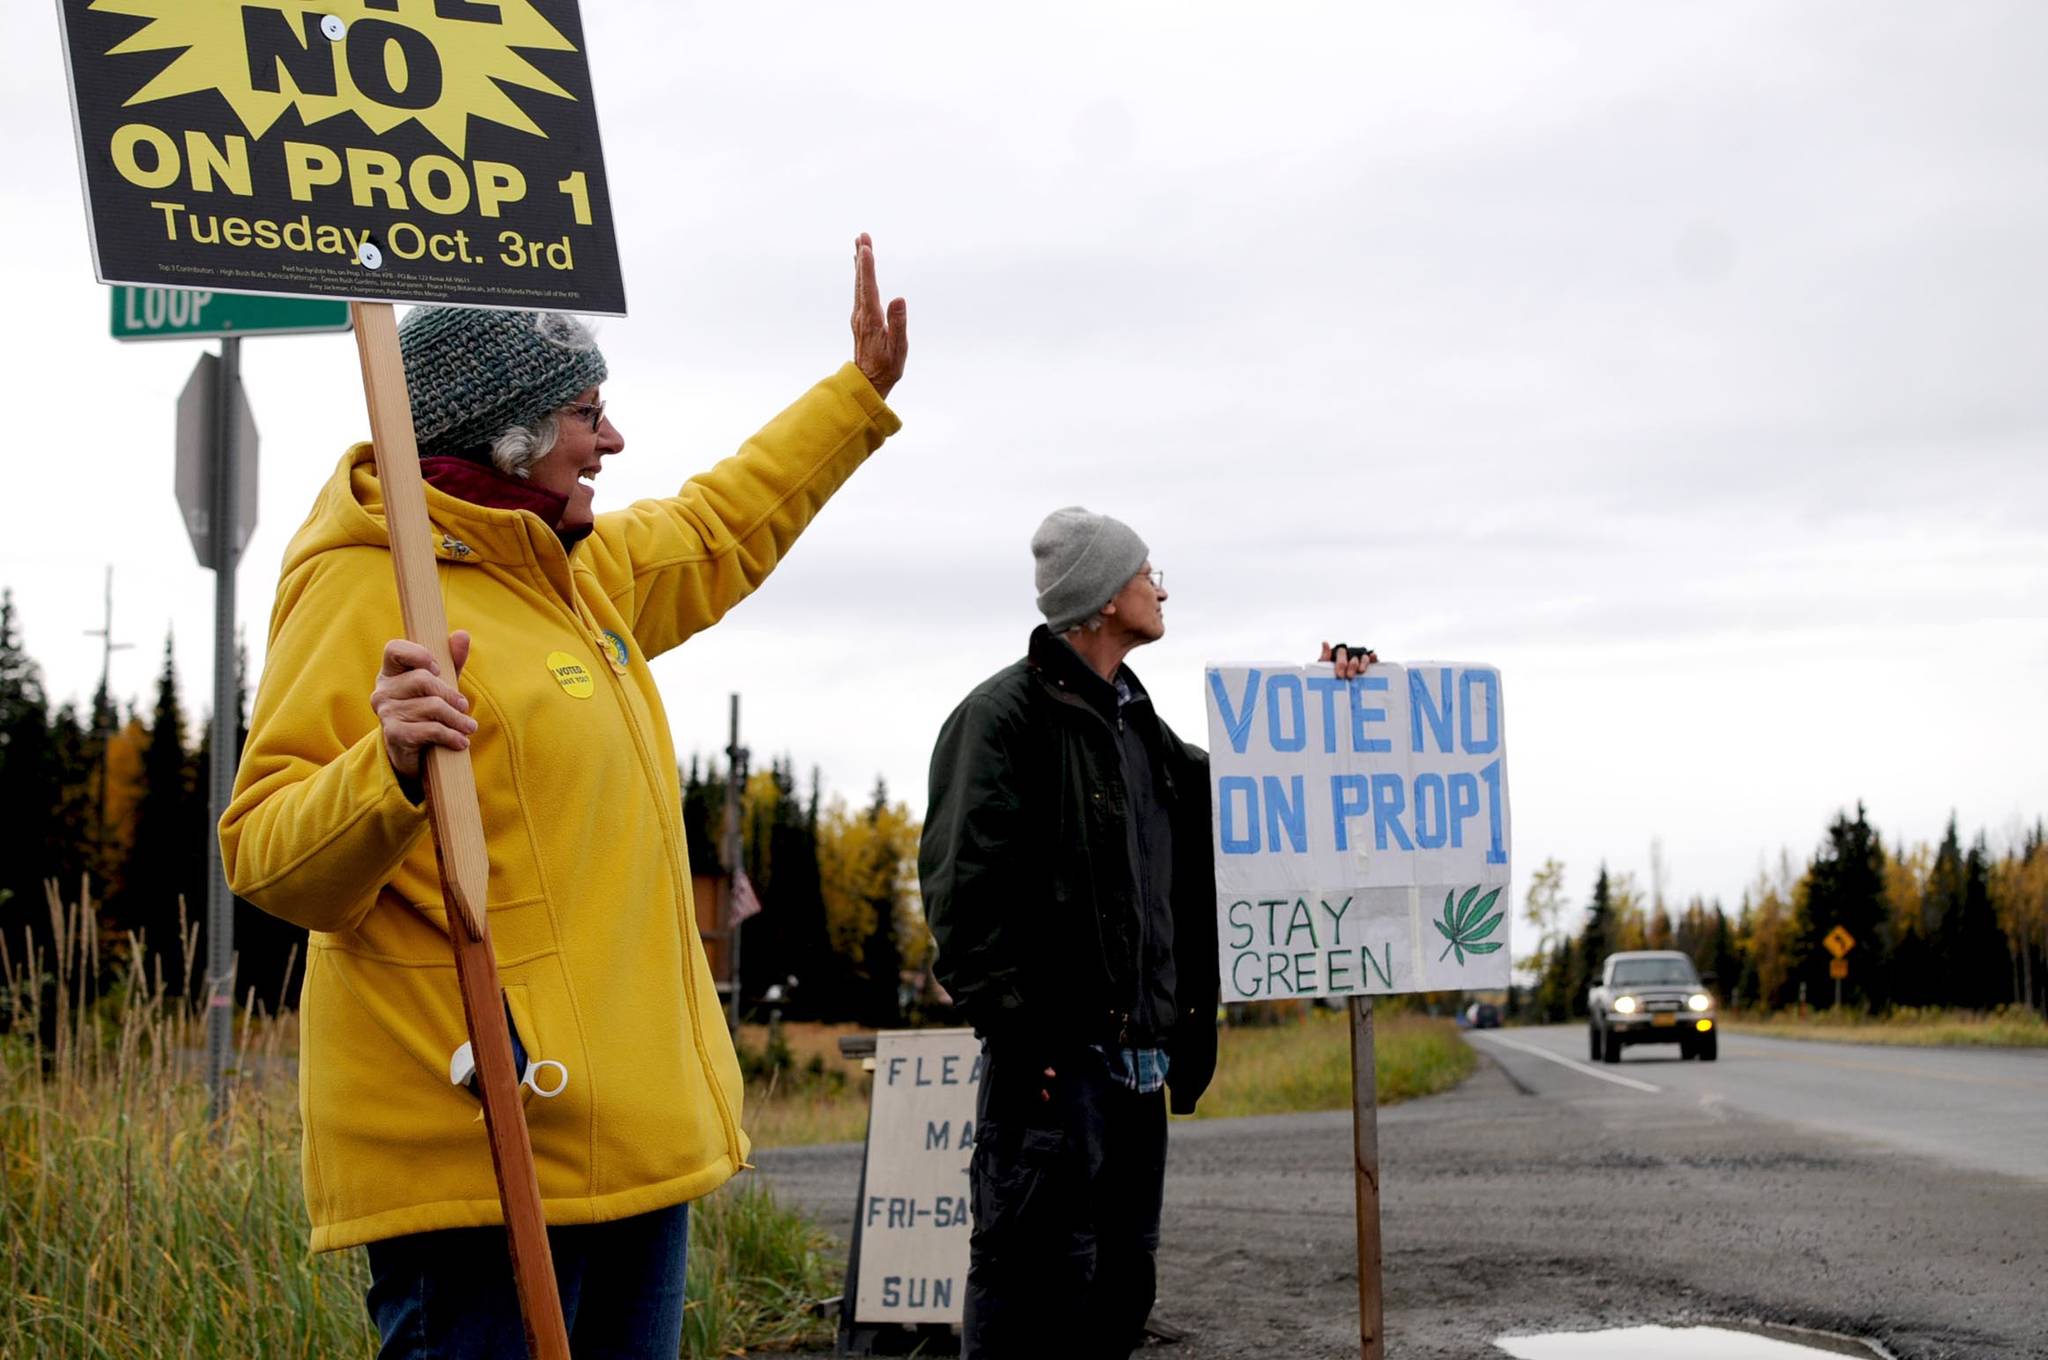 Ann Fraser (left) and Steve Waldron (right), both of Kasilof) wave signs opposing Kenai Peninsula Borough Proposition 1 on the corner of Pollard Loop and the Sterling Highway on Tuesday, Oct. 3, 2017 in Kasilof, Alaska. Voters in Kasilof and the other unincorporated communities of the borough voted Tuesday on Proposition 1, which asked whether commercial cannabis operations should be legal in the borough ouside the city limits. (Photo by Elizabeth Earl/Peninsula Clarion)